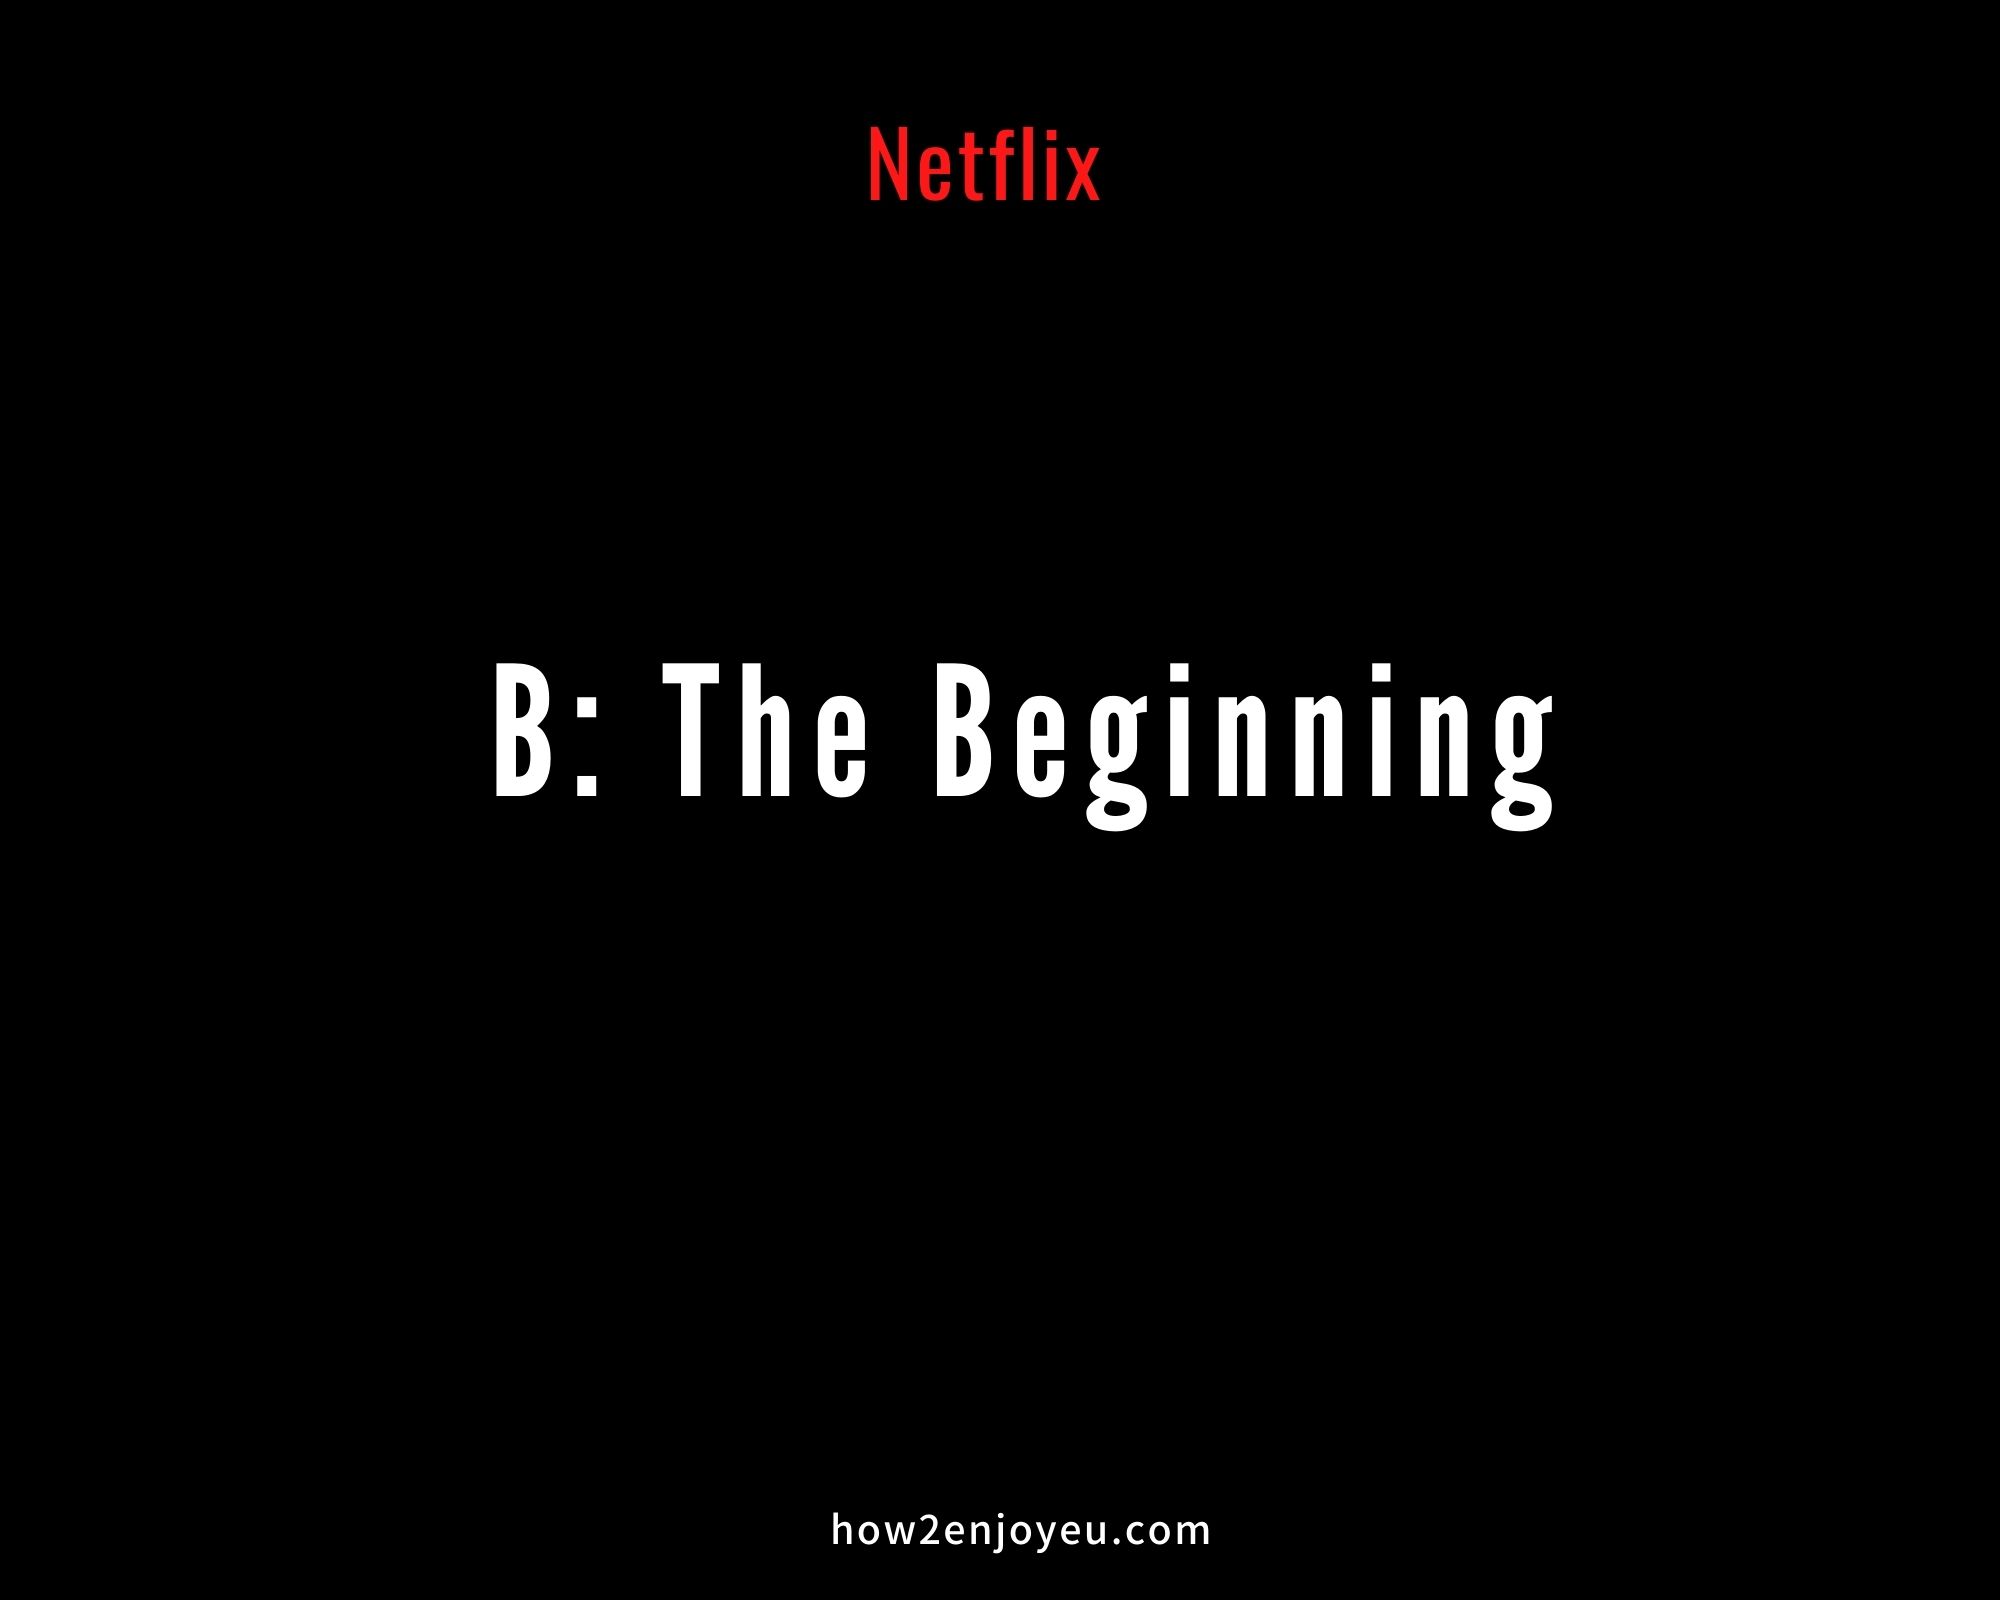 Read more about the article ネットフリックス「B: The Beginning」 【ドイツで日本制作の作品だけをNetflixで観る1週間】